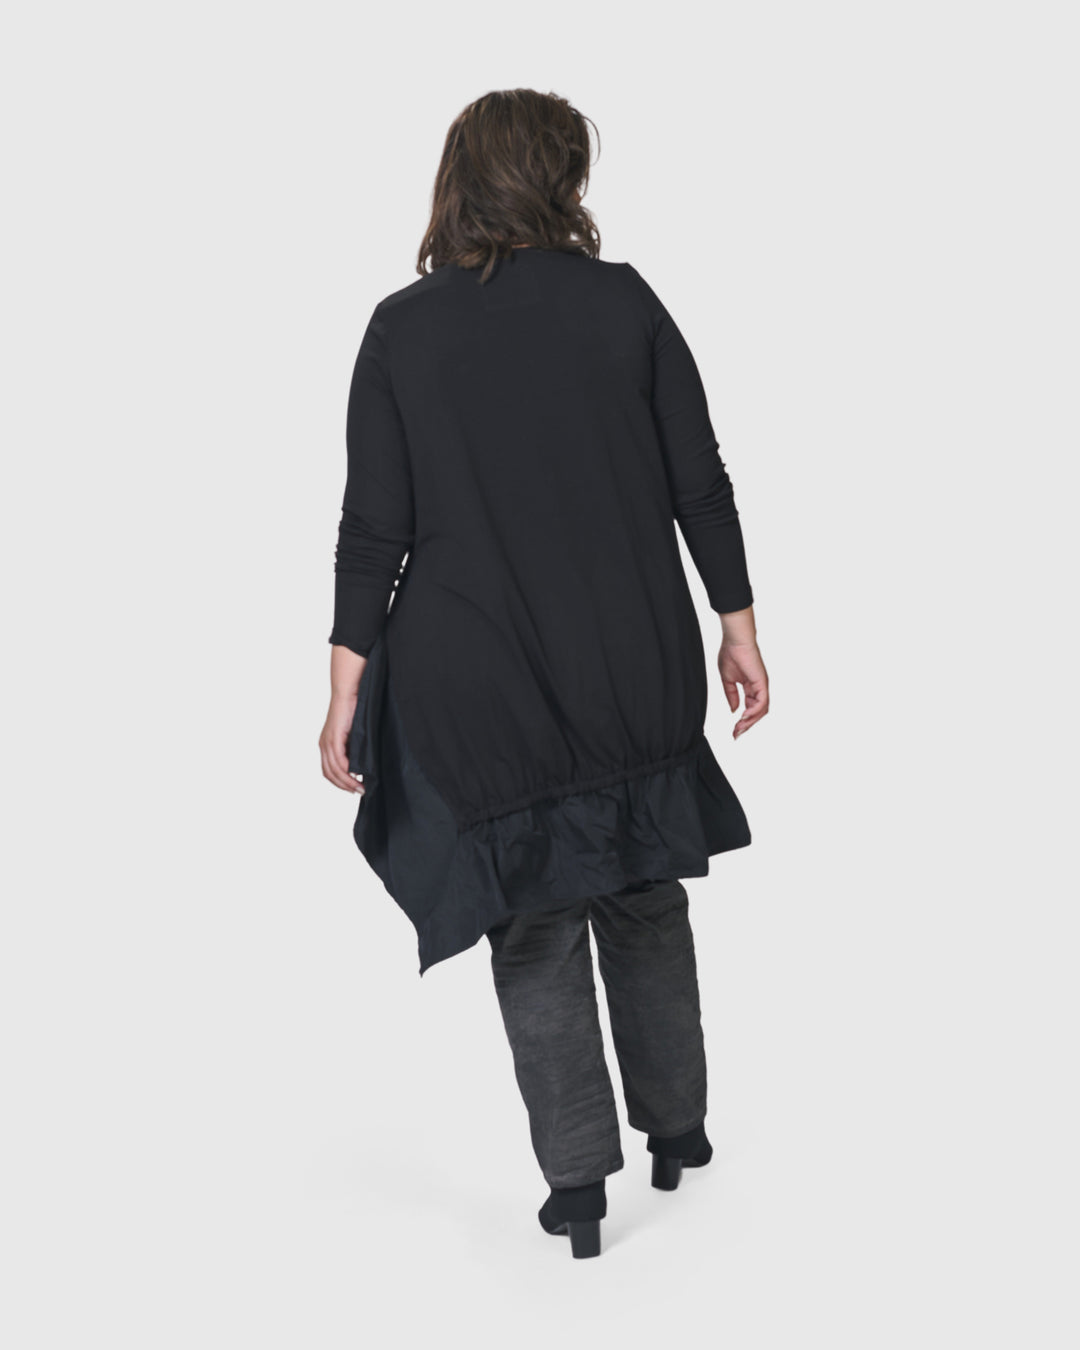 The back of a woman wearing an ALEMBIKA Urban New Wave Tunic Top in Black with long sleeves.